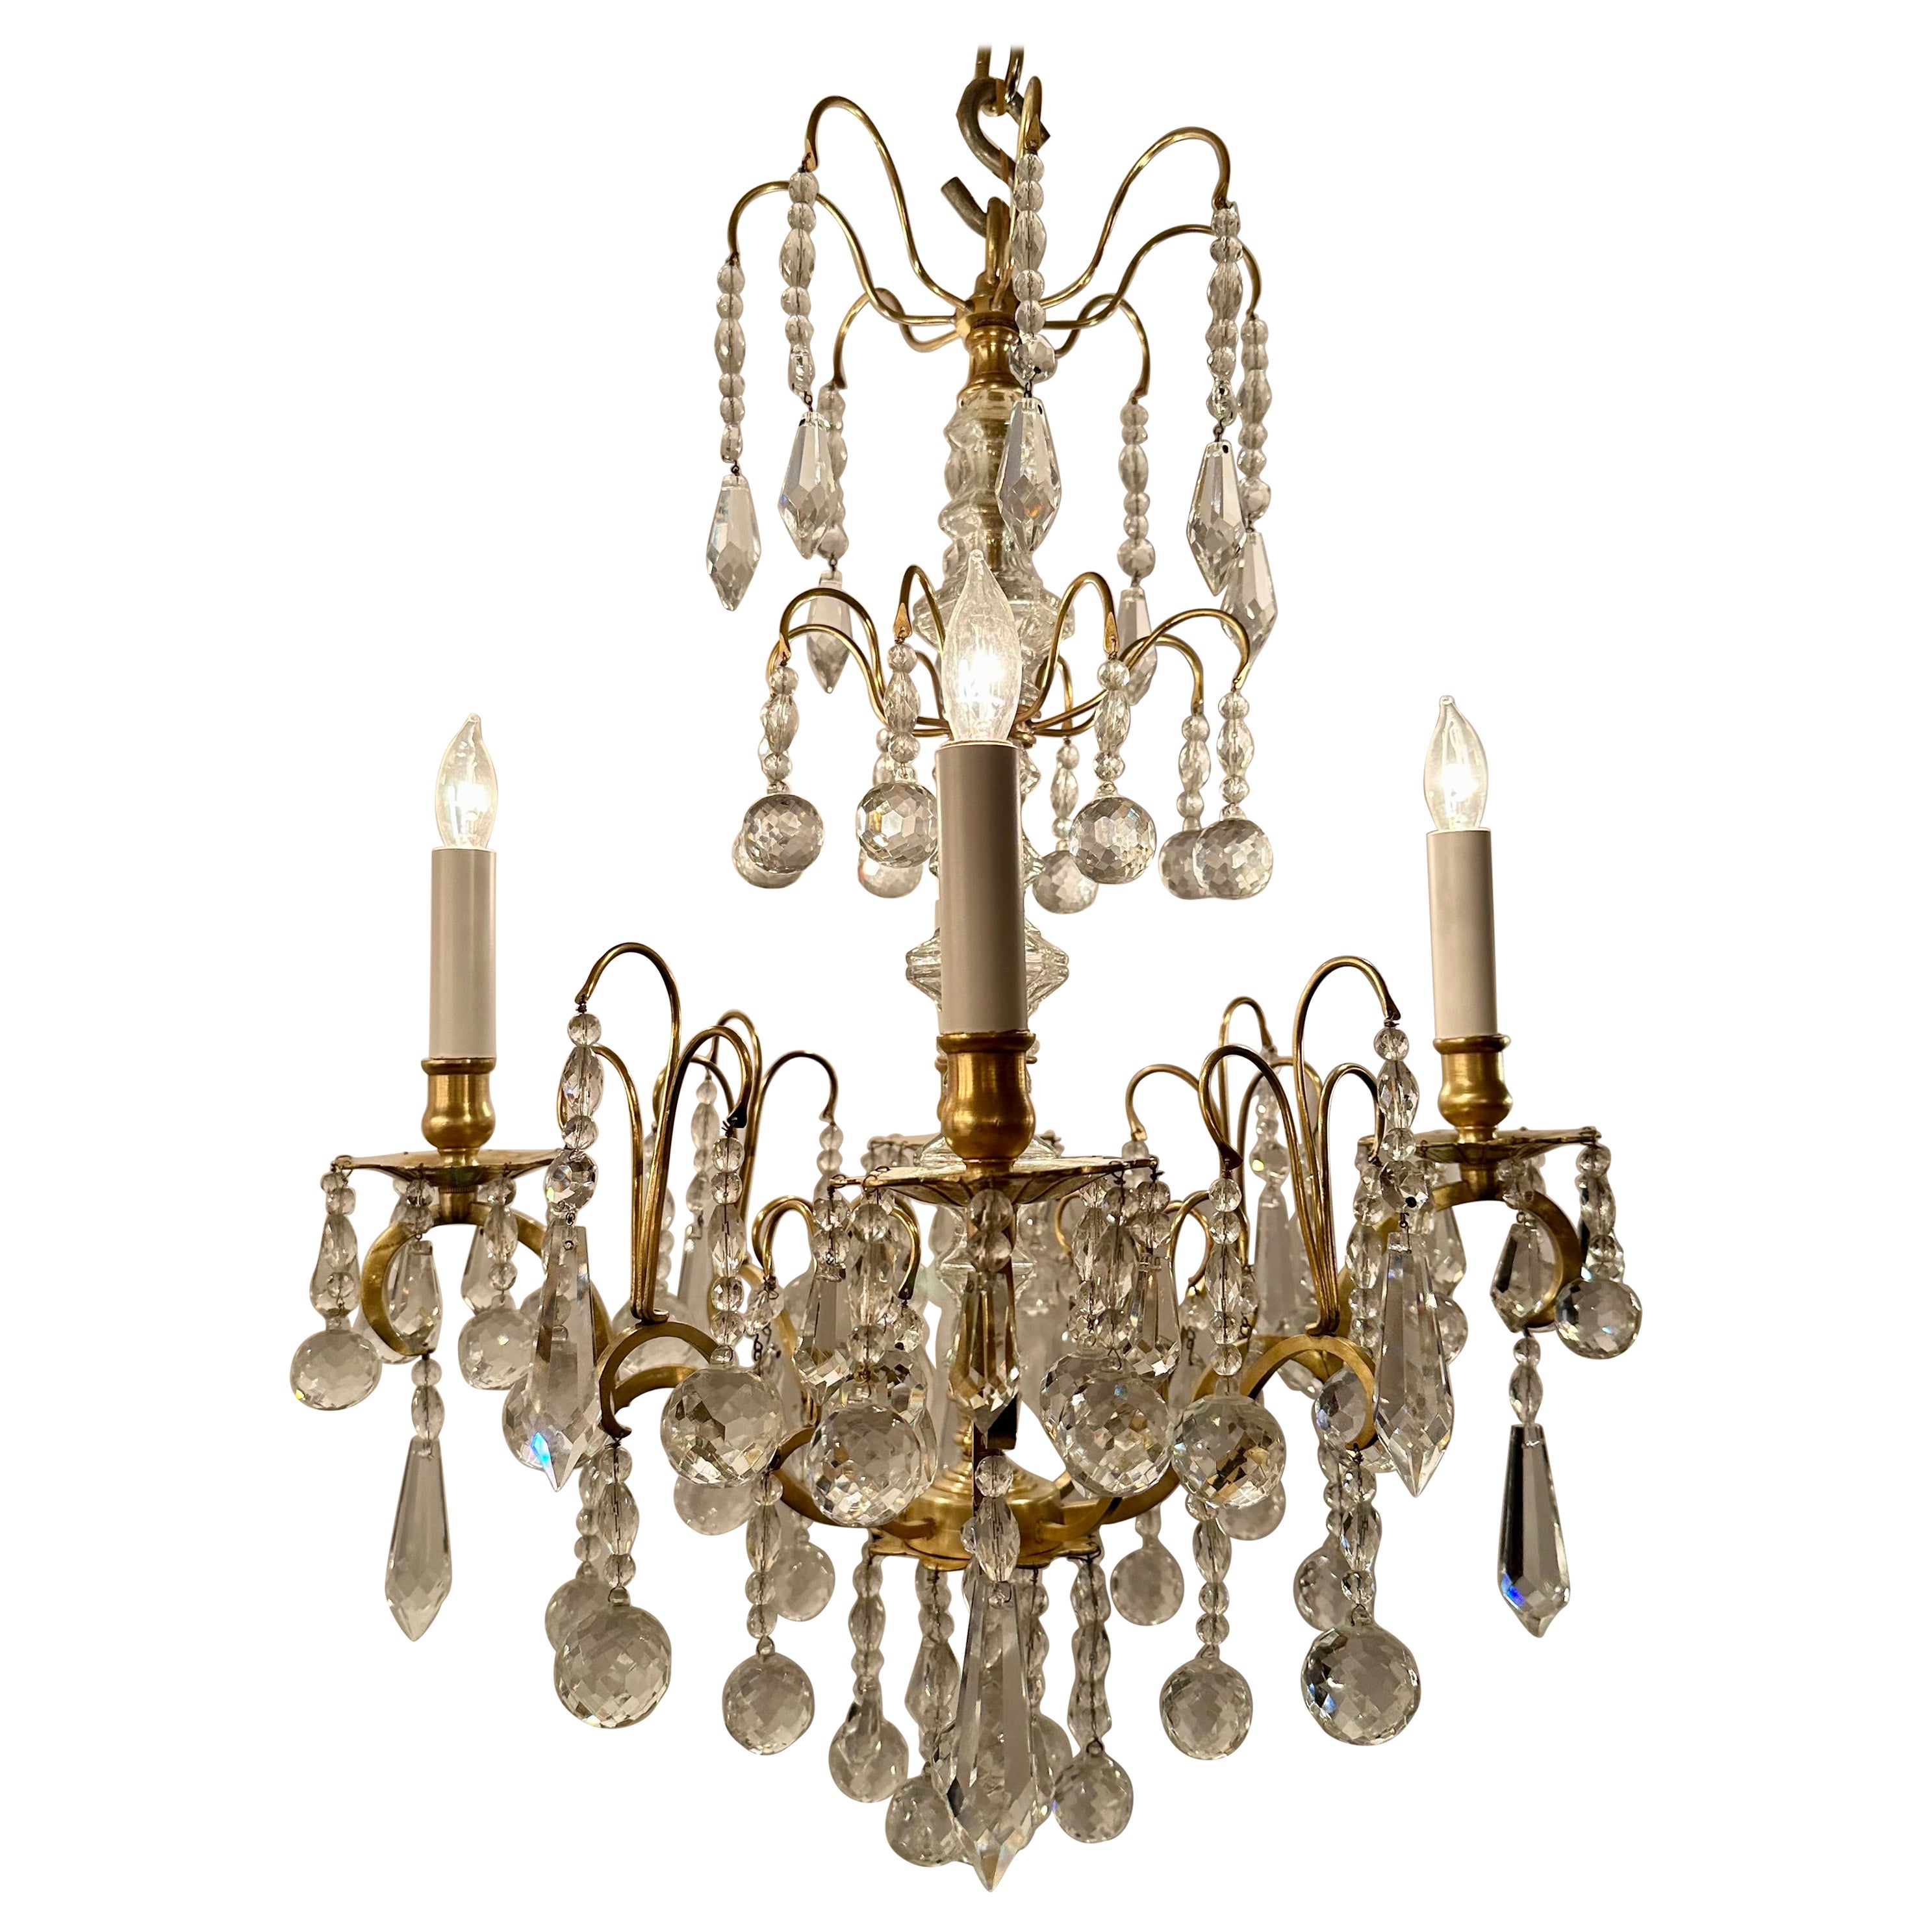 Antique French Crystal and Gold Bronze Chandelier, Circa 1910-1920.